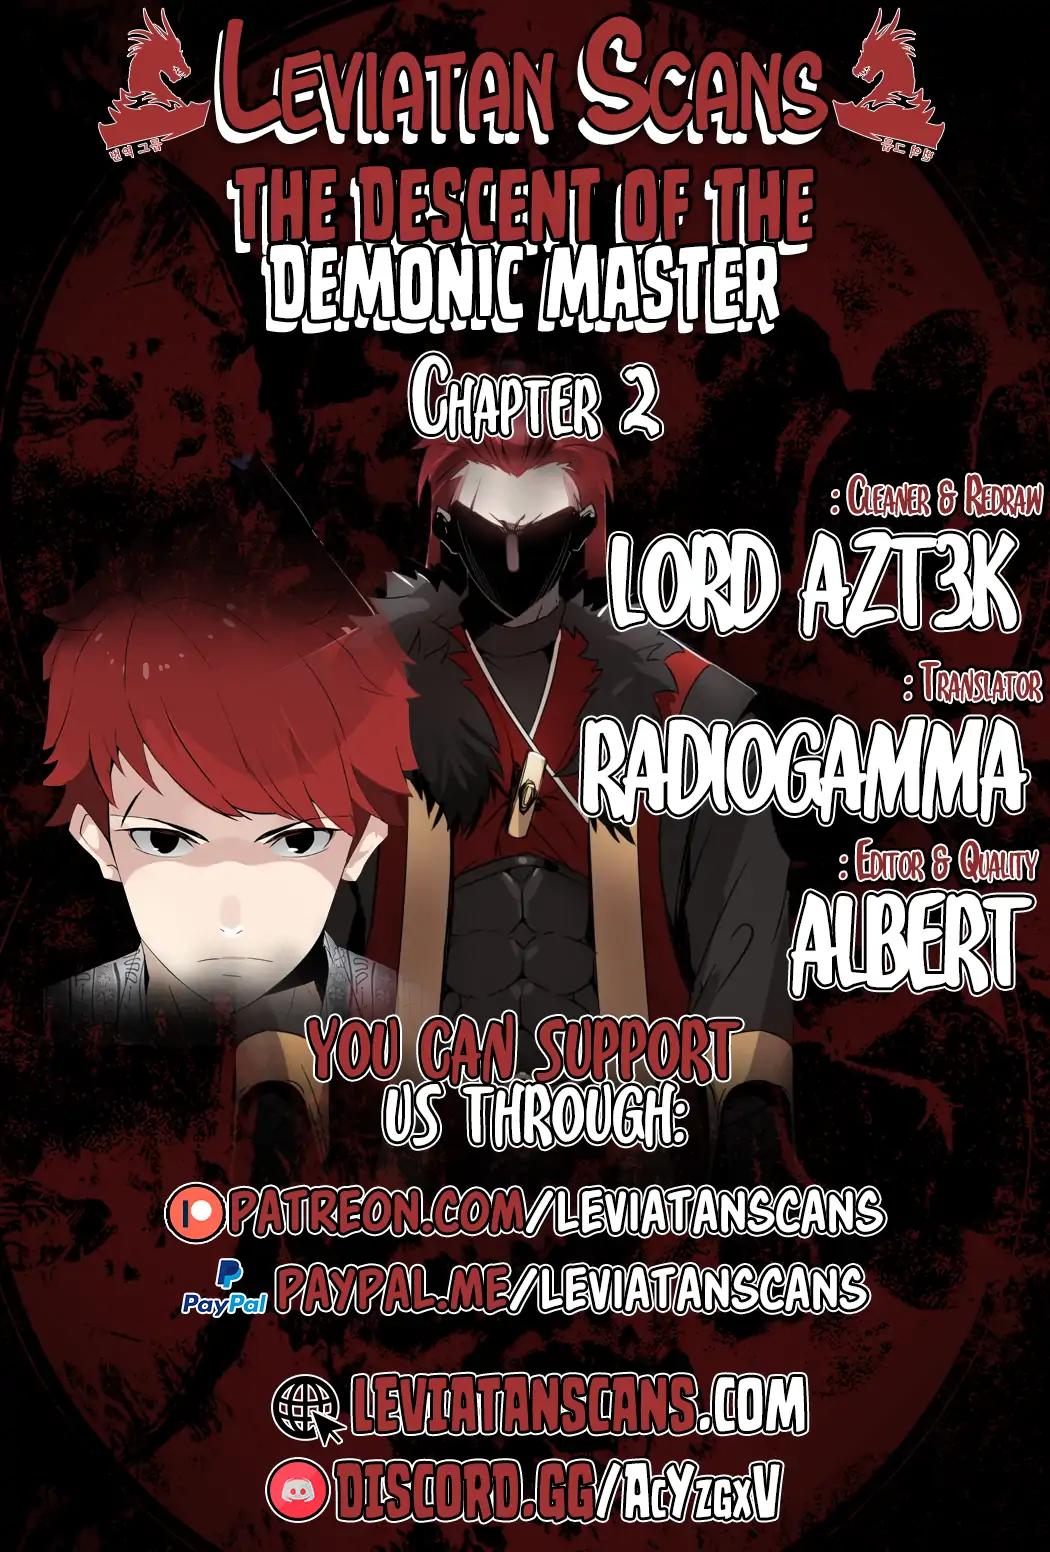 The Descent of the Demonic Master Chapter 2